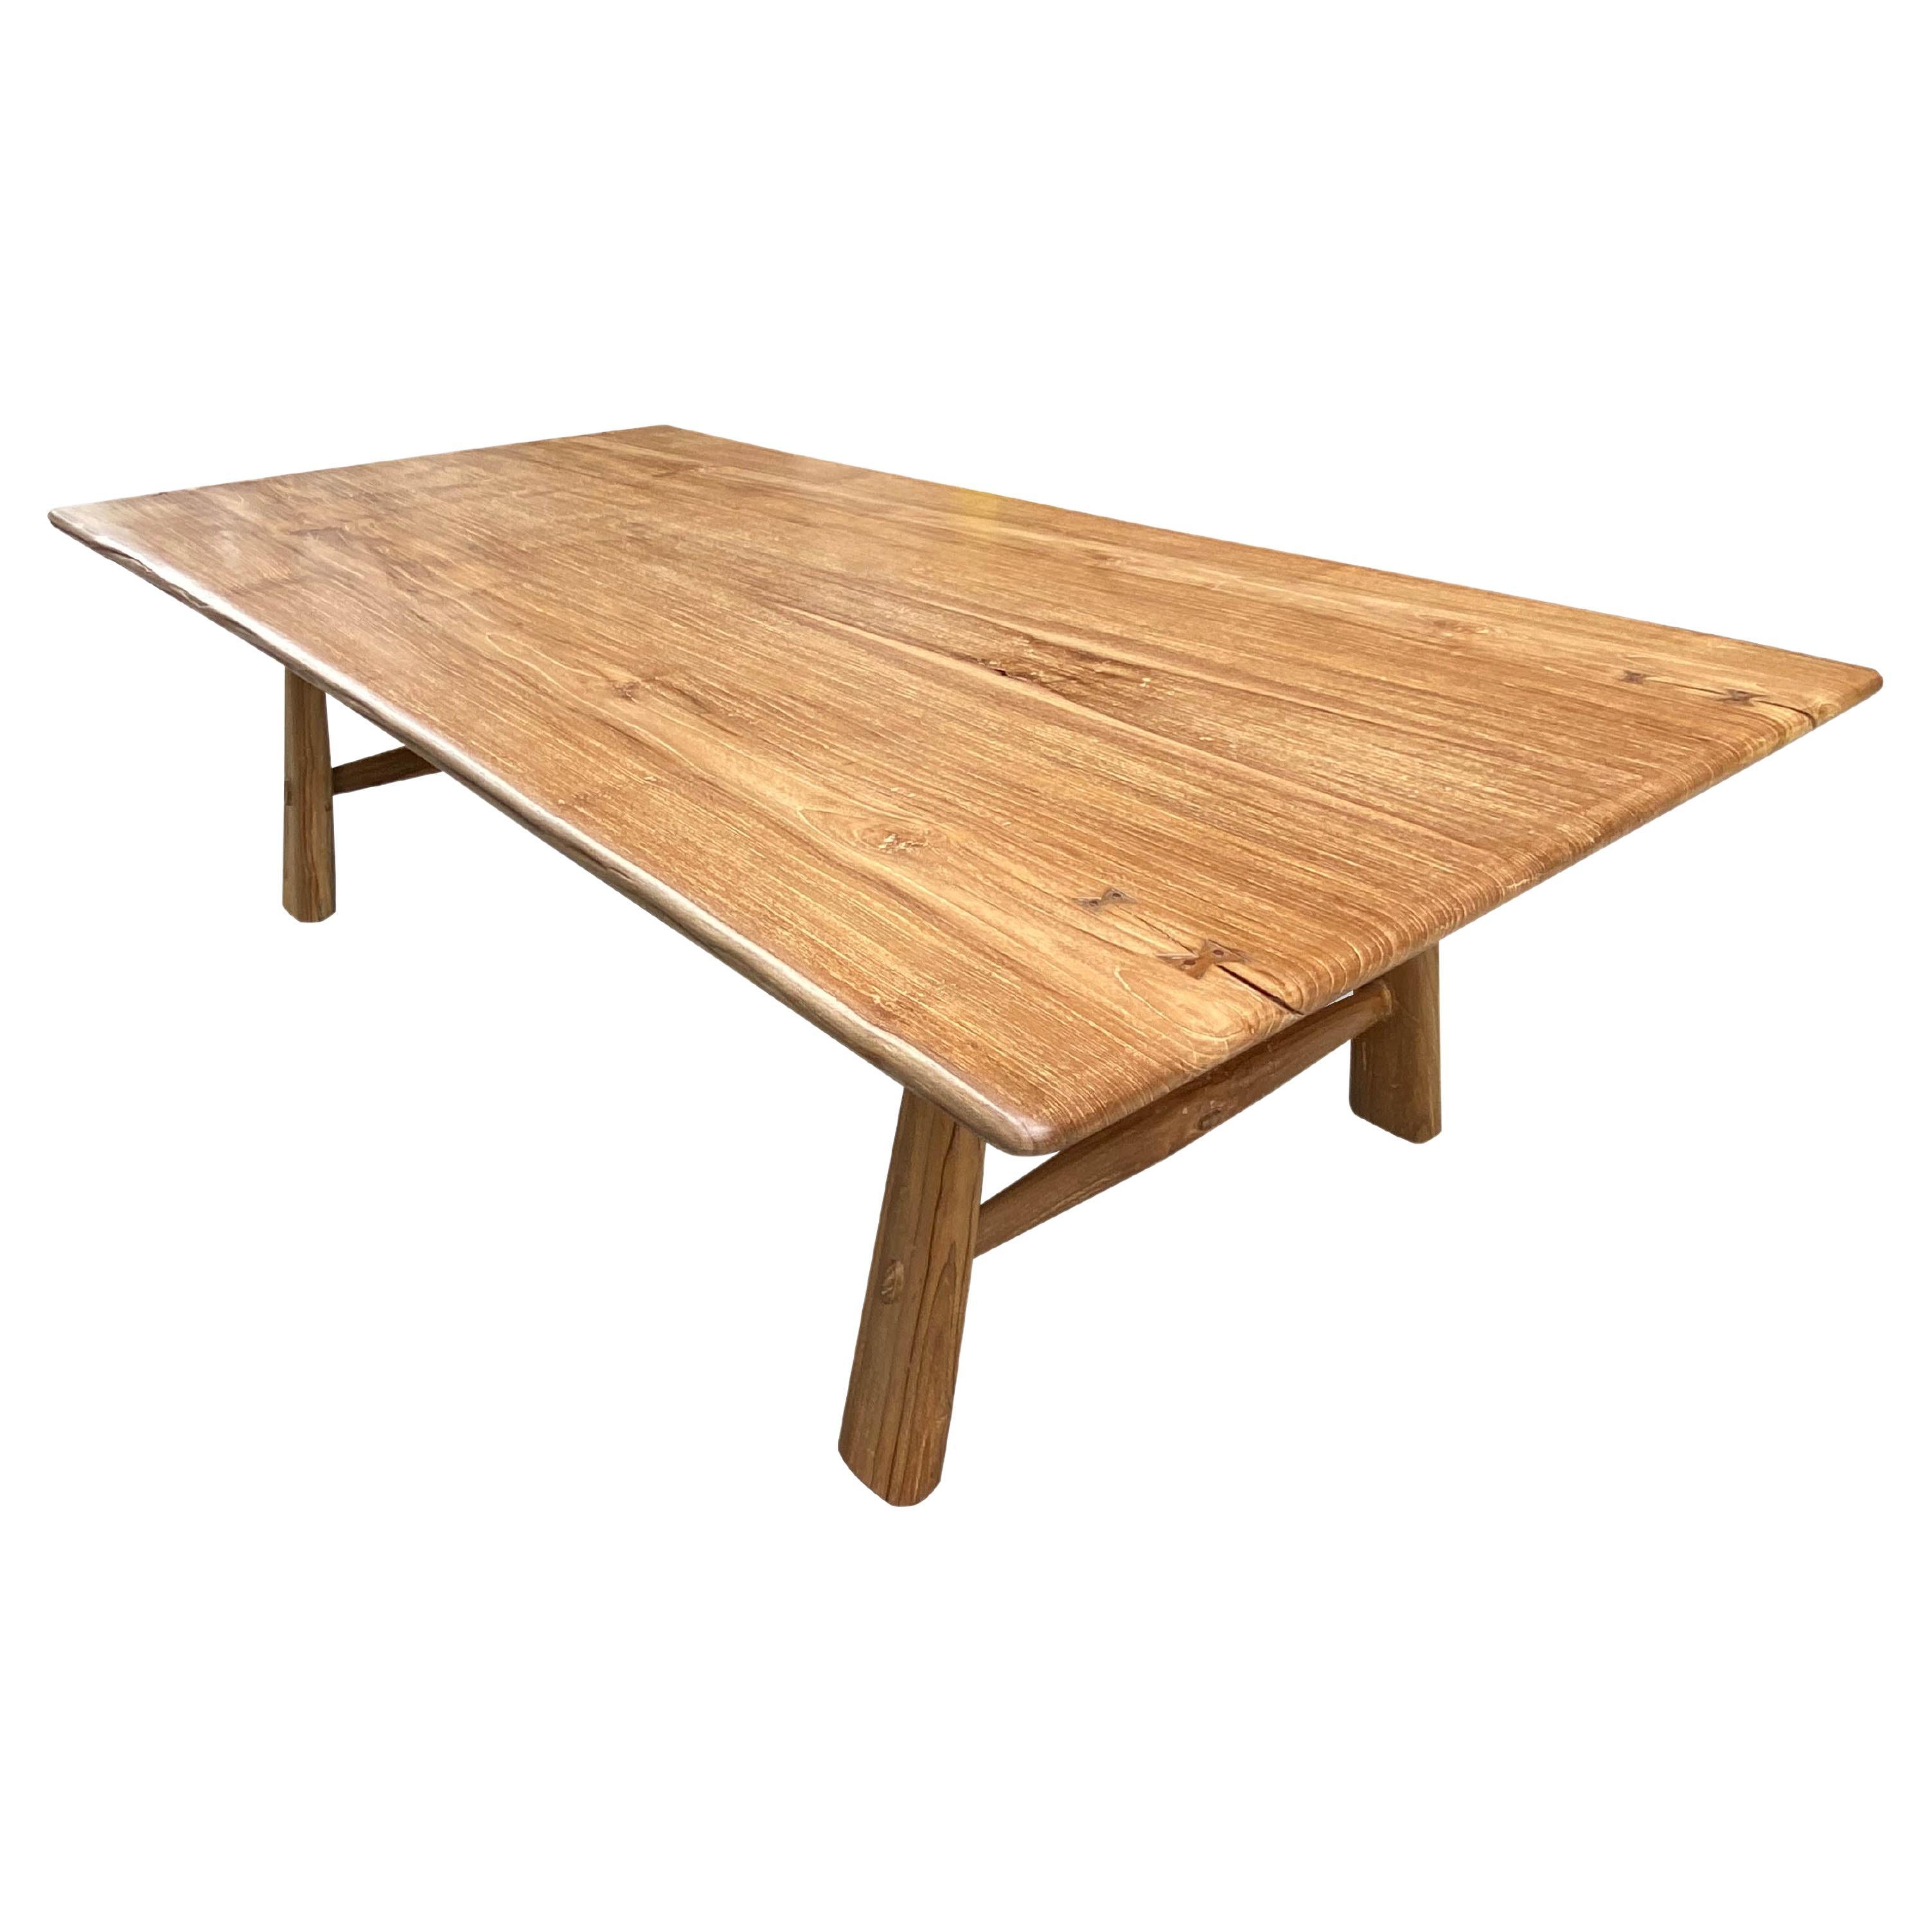 Andrianna Shamaris Midcentury Couture Teak Wood Dining Table For Sale